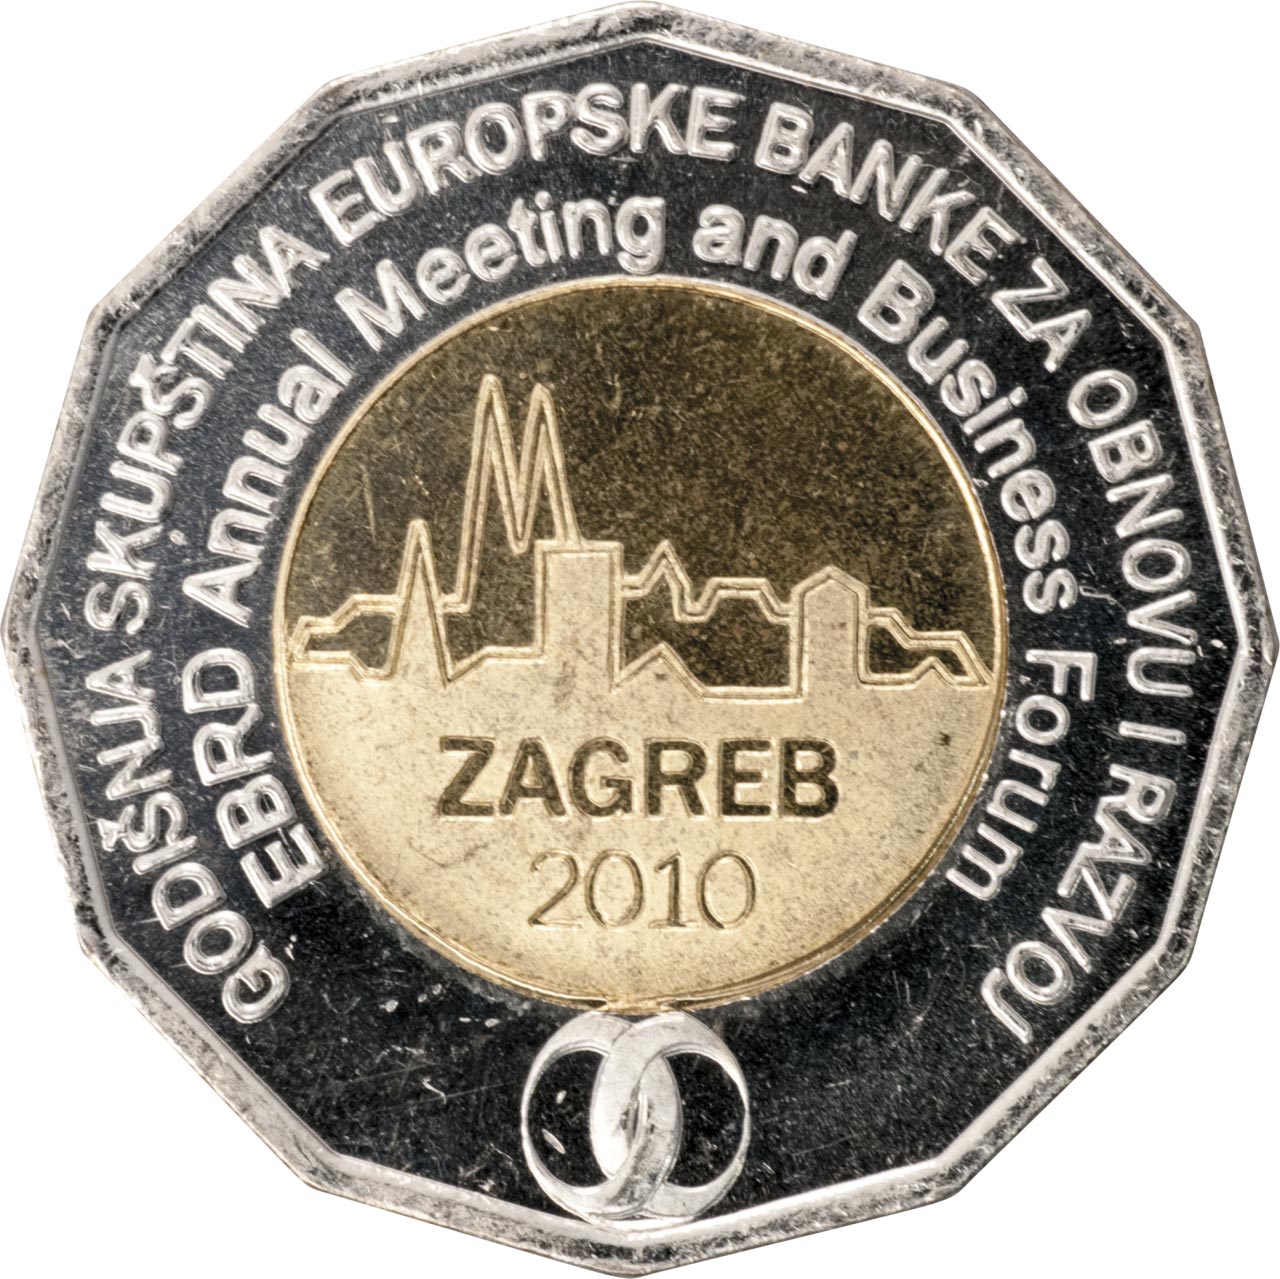 Image of 25 kuna coin - EBRD Annual Meeting and Business Forum | Croatia 2010.  The Copper–Nickel (CuNi) coin is of BU quality.